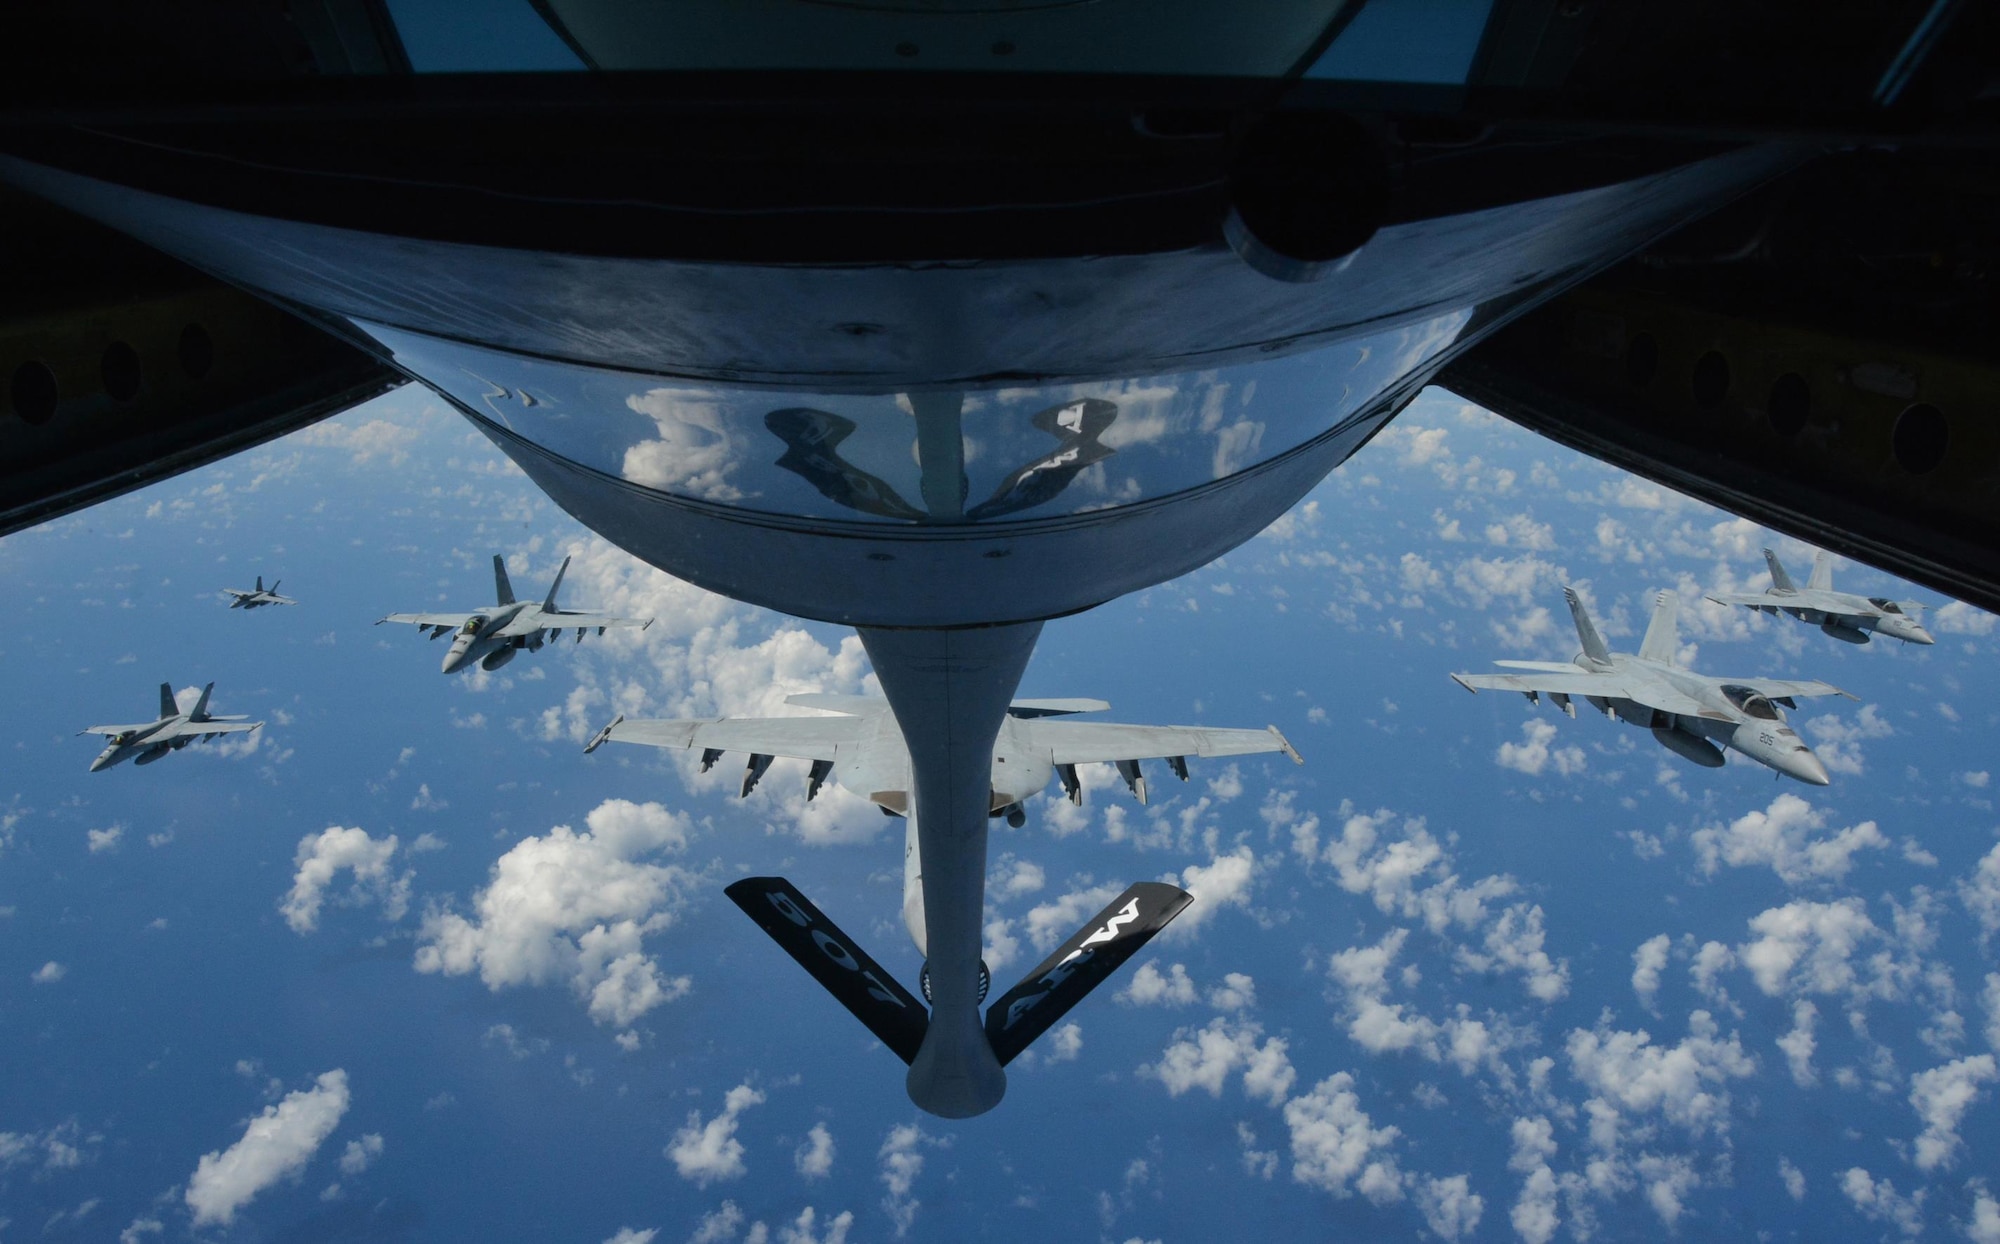 160720-F-EW270-248 JOINT BASE PEARL HARBOR-HICKAM (July 20, 2016) Six U.S. Navy F-18 Hornets await refueling from a KC-135R Stratotanker belonging to the 507th Air Refueling Wing at Tinker Air Force Base, Okla., during Rim of the Pacific 2016. Twenty-six nations, more than 40 ships and submarines, more than 200 aircraft, and 25,000 personnel are participating in RIMPAC from June 30 to Aug. 4, in and around the Hawaiian Islands and Southern California. The world's largest international maritime exercise, RIMPAC provides a unique training opportunity that helps participants foster and sustain the cooperative relationships that are critical to ensuring the safety of sea lanes and security on the world's oceans. RIMPAC 2016 is the 25th exercise in the series that began in 1971. (U.S. Air Force photo by Tech. Sgt. Lauren Gleason)